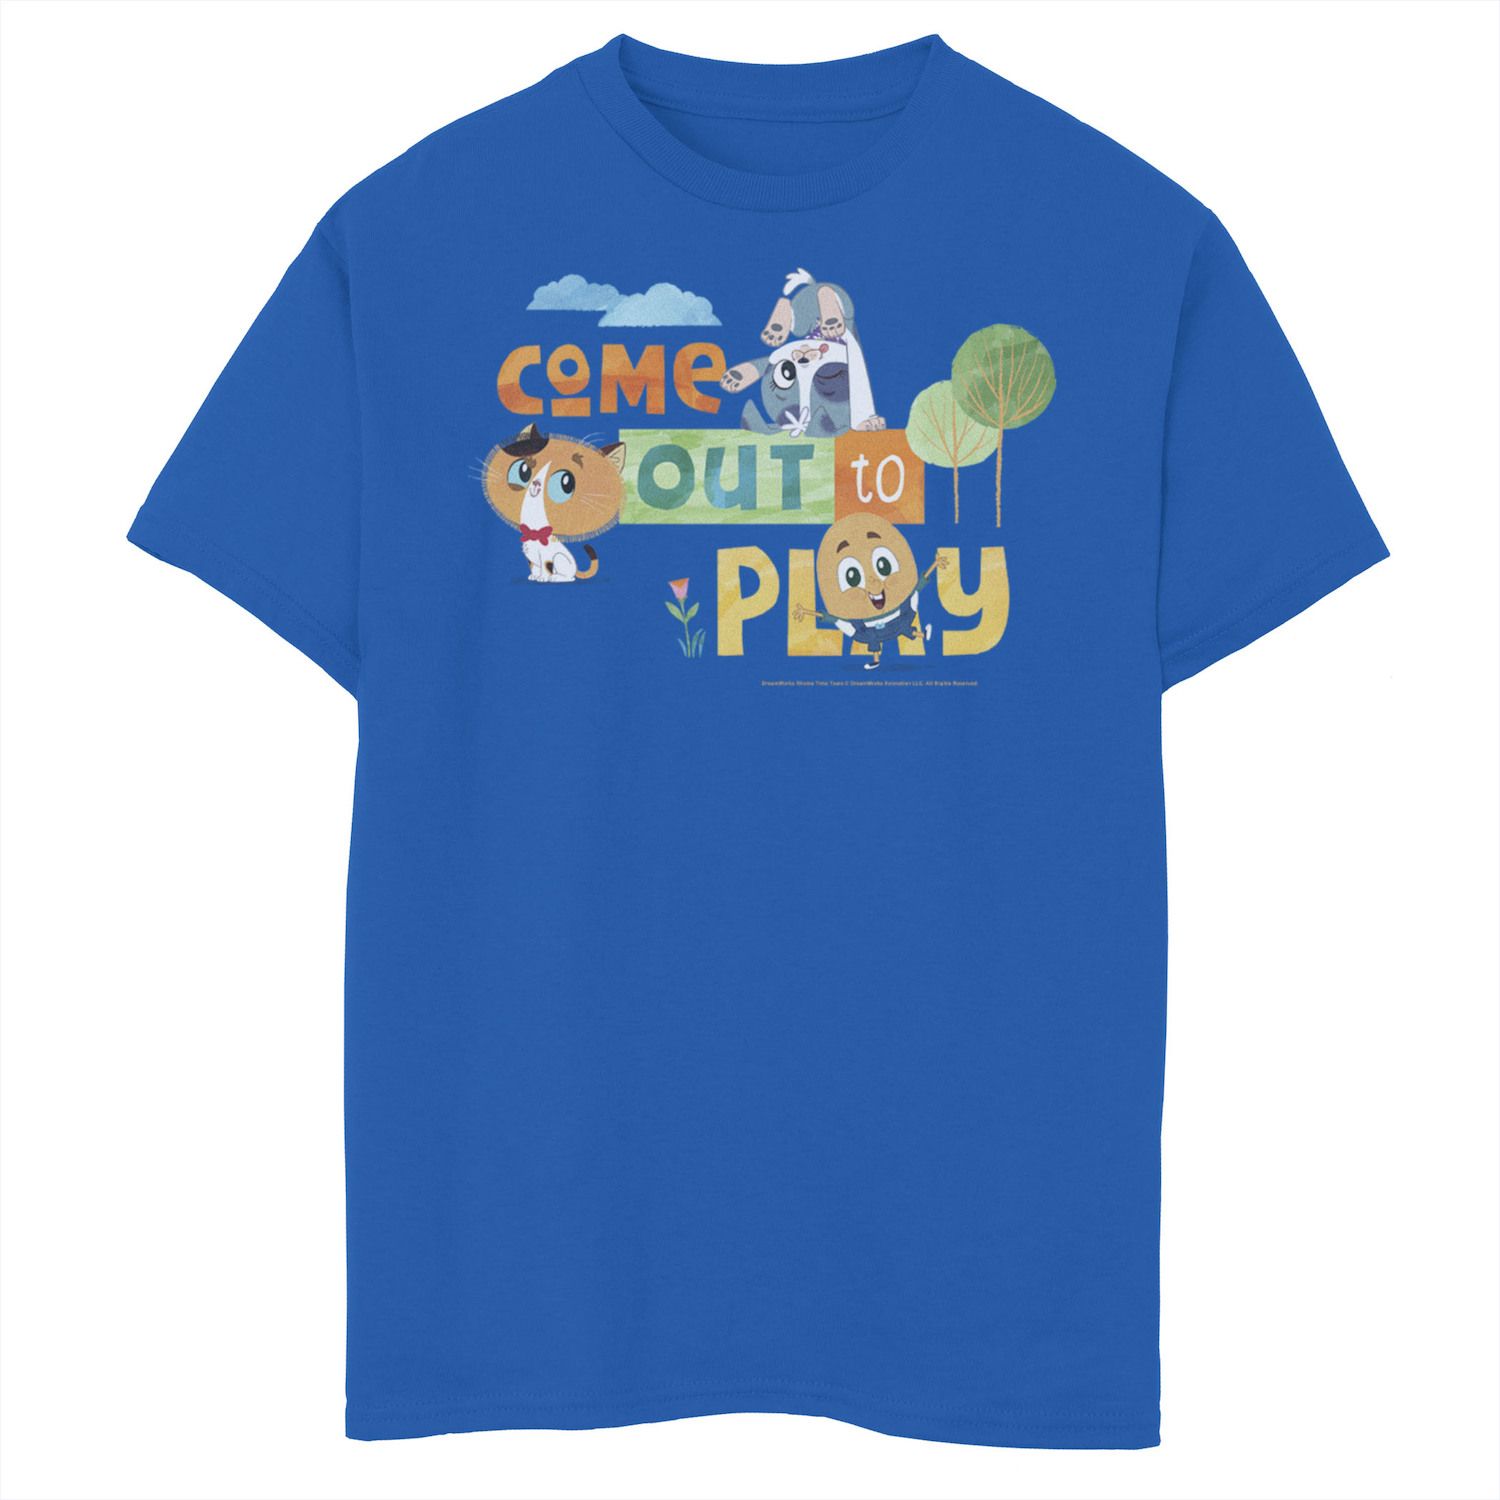 Image for DreamWorks Boys 8-20 Dreamworks Rhyme Time Town Come Out To Play Sketch Graphic Tee at Kohl's.